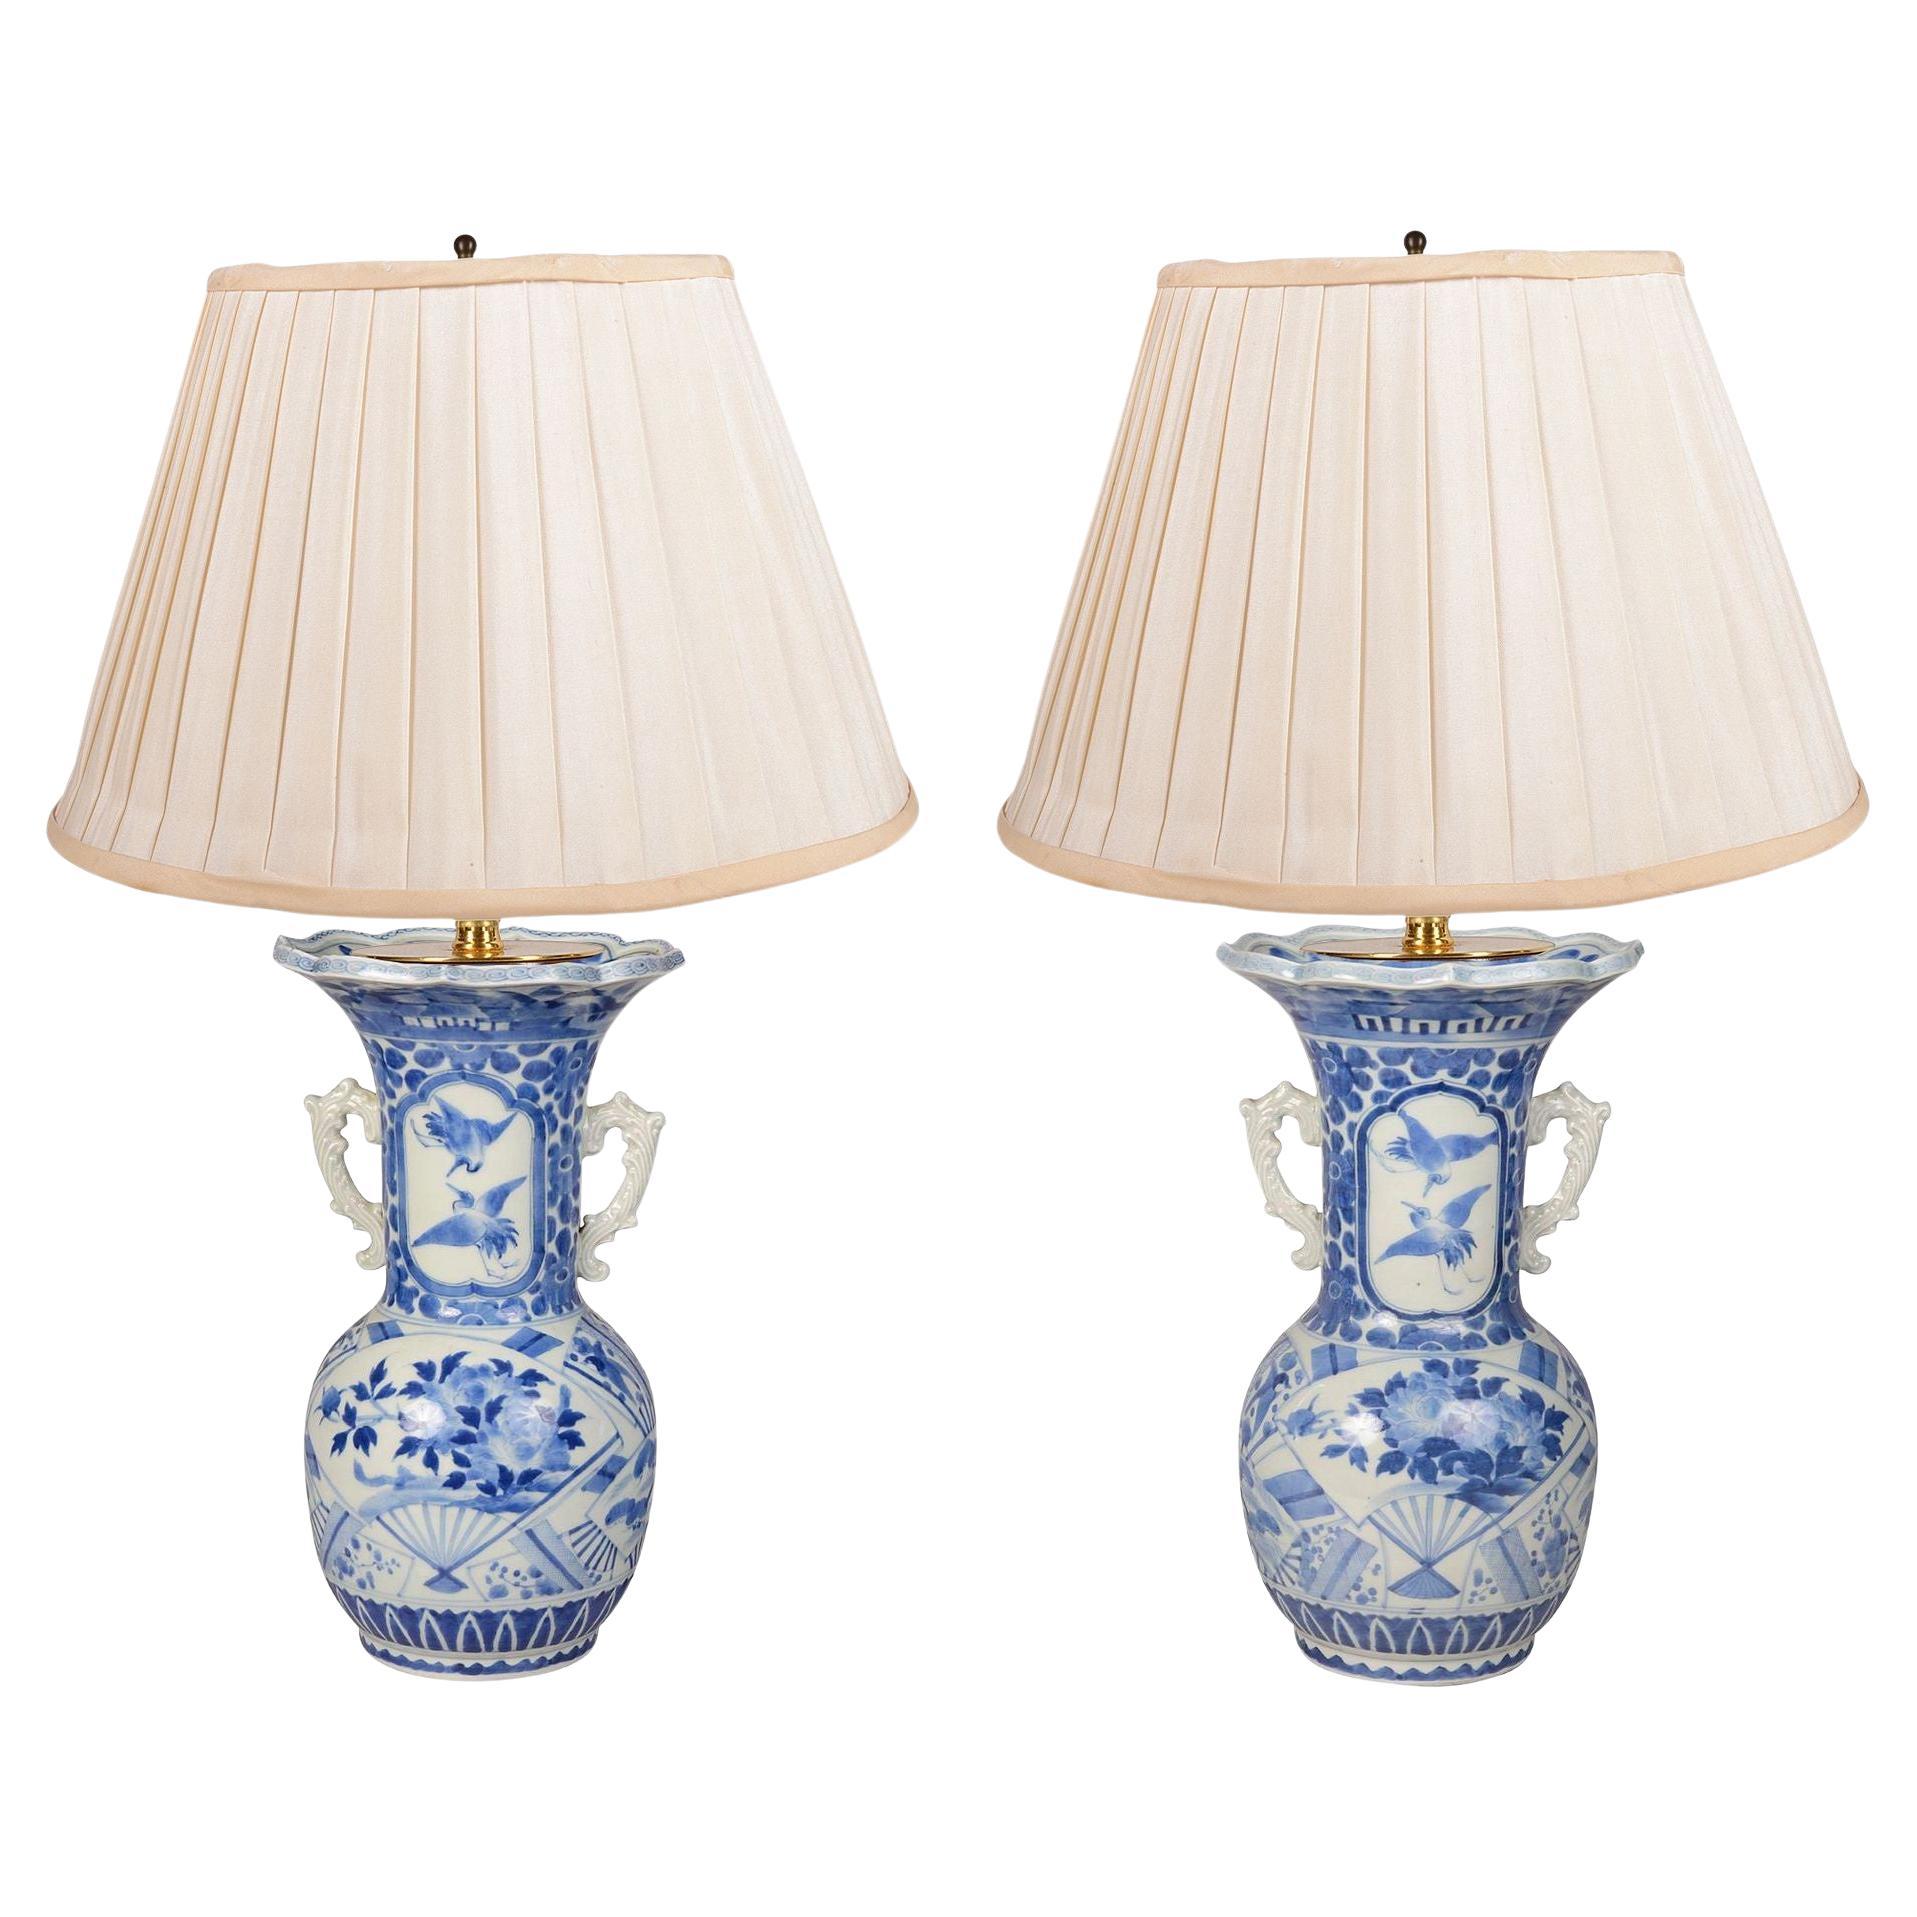 Pair of Japanese Blue and White twin handle lamps / vases, circa 1900 For Sale